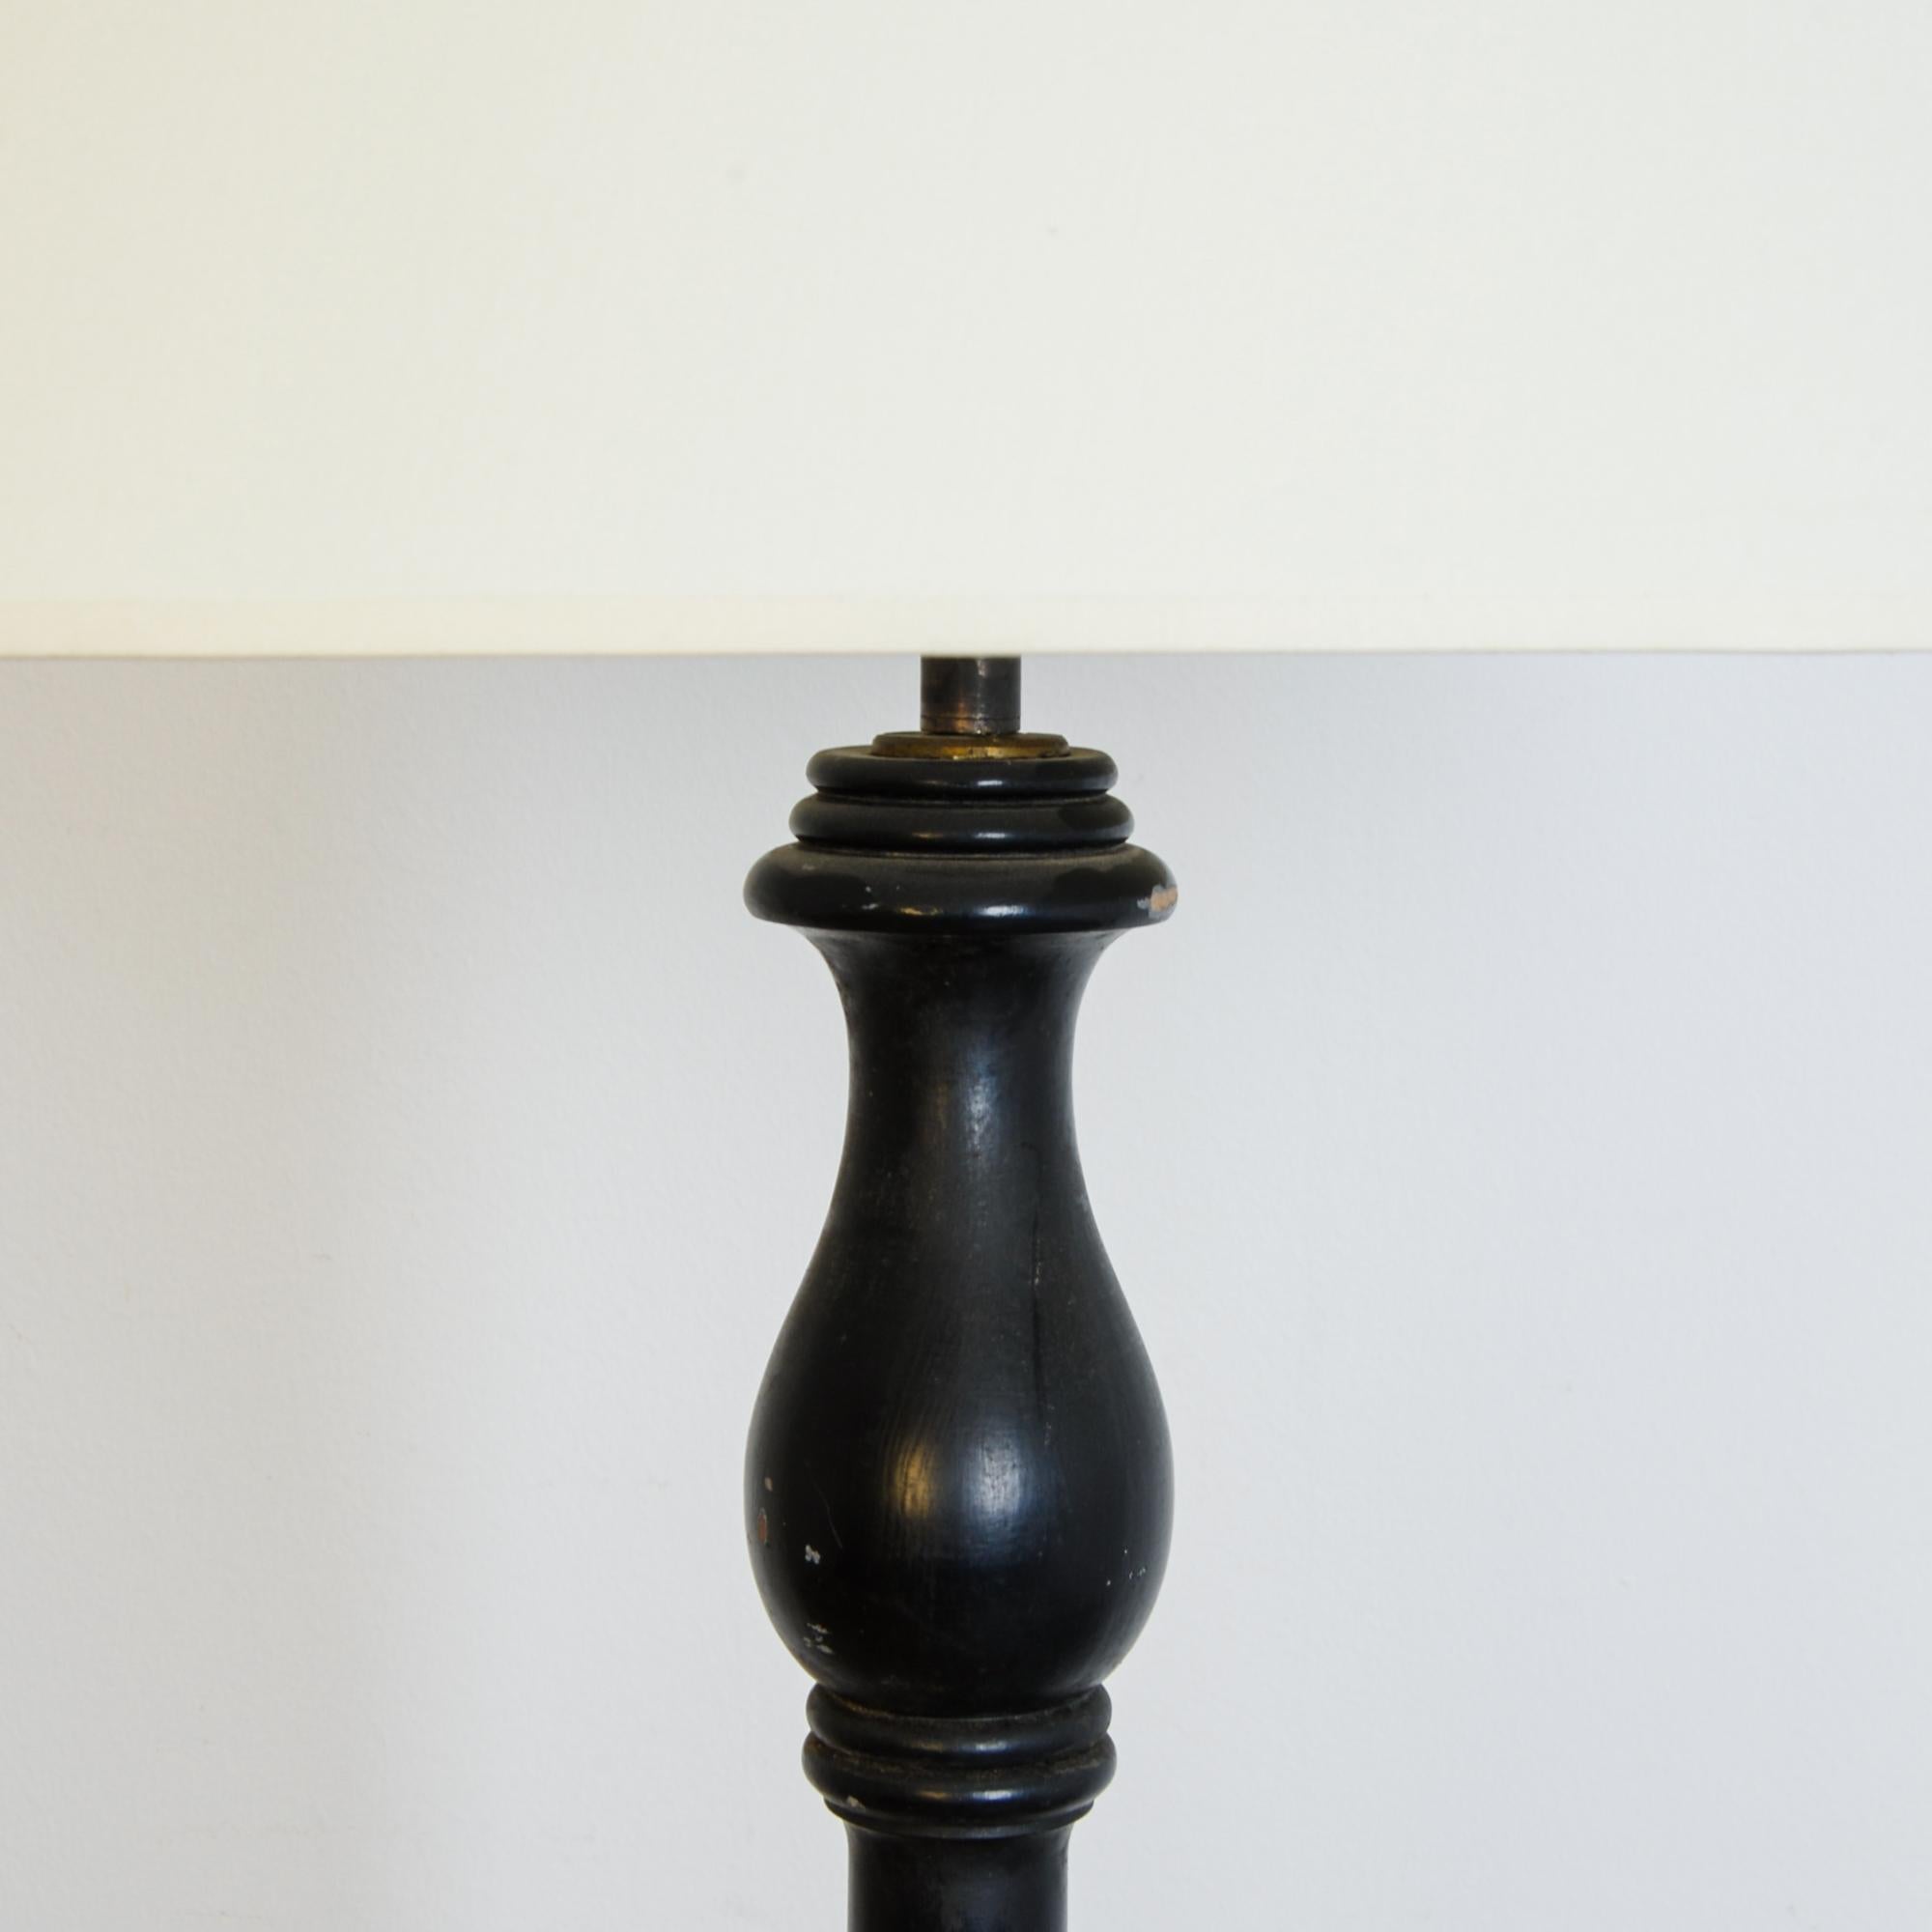 A black lacquer floor lamp from France, circa 1920. Influenced by a period revival fashion, this lamp shows a neoclassical architectural character, with turned ornamental segments, column and capitol, simplified and complimented by an aged patina.